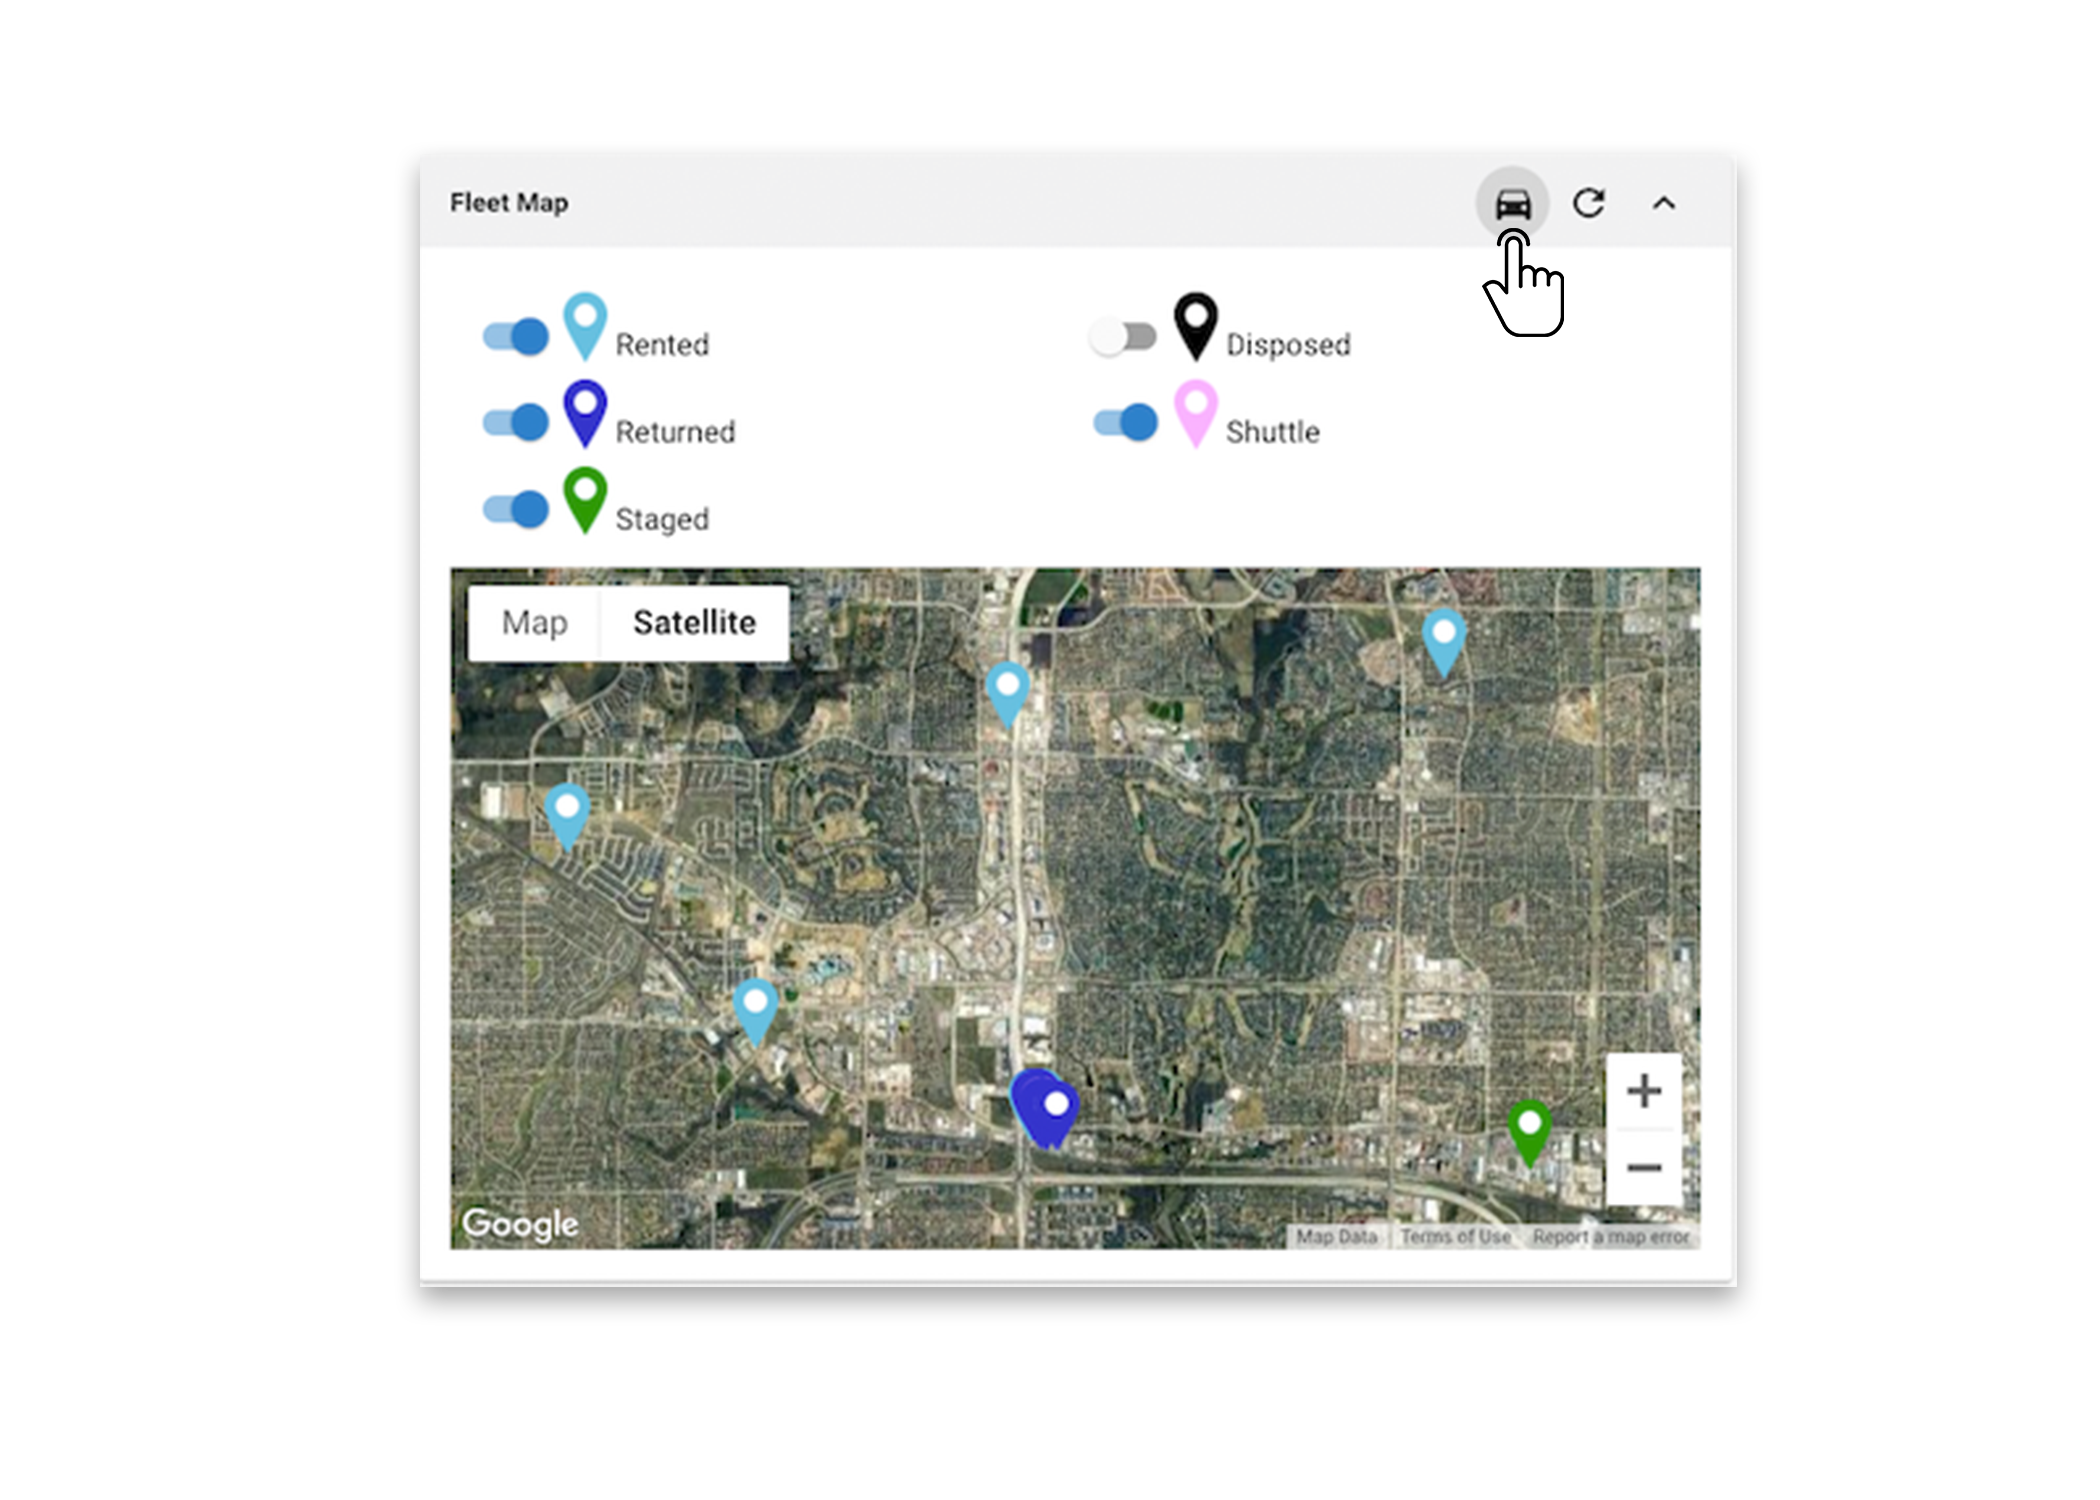 Image: Dealerware Fleet Map panel, satellite view with several pin icons indicating vehicle locations, map legend diplayed screen, fingertap icon indicating the car icon to display legend